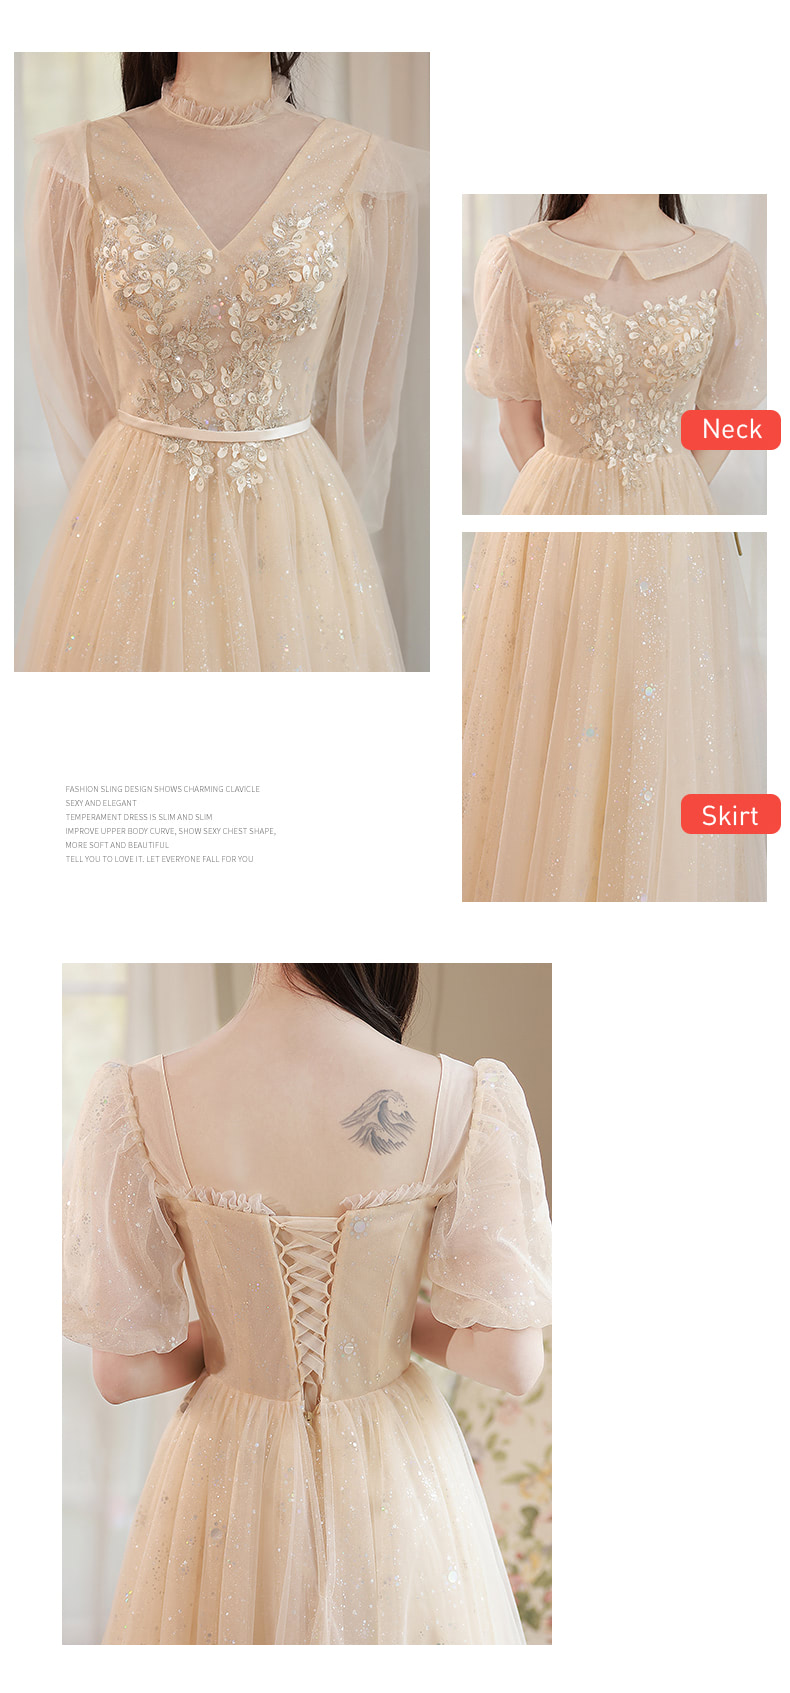 Charming-Embroidery-Bridesmaid-Dress-Banquet-Party-Ball-Gown15